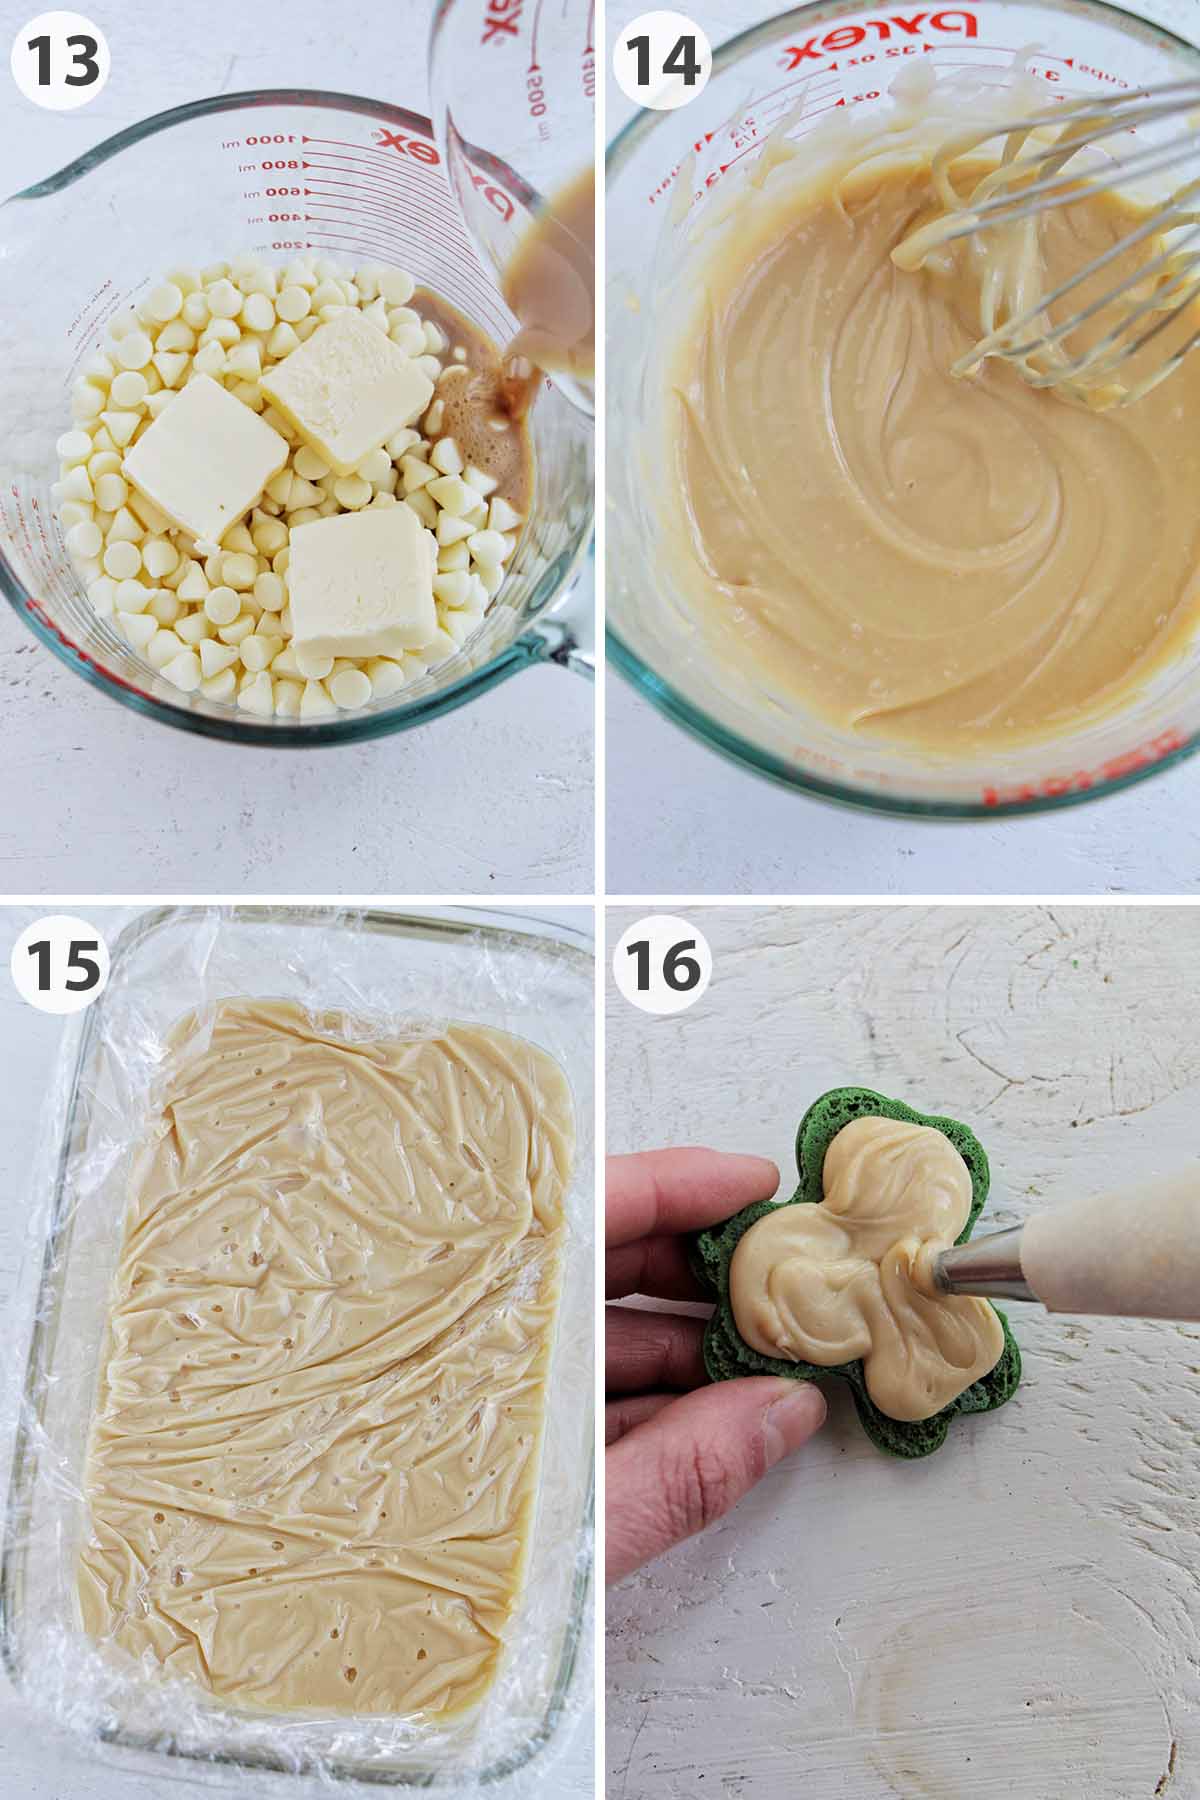 four numbered photos showing how to make baileys ganache and fill macarons.